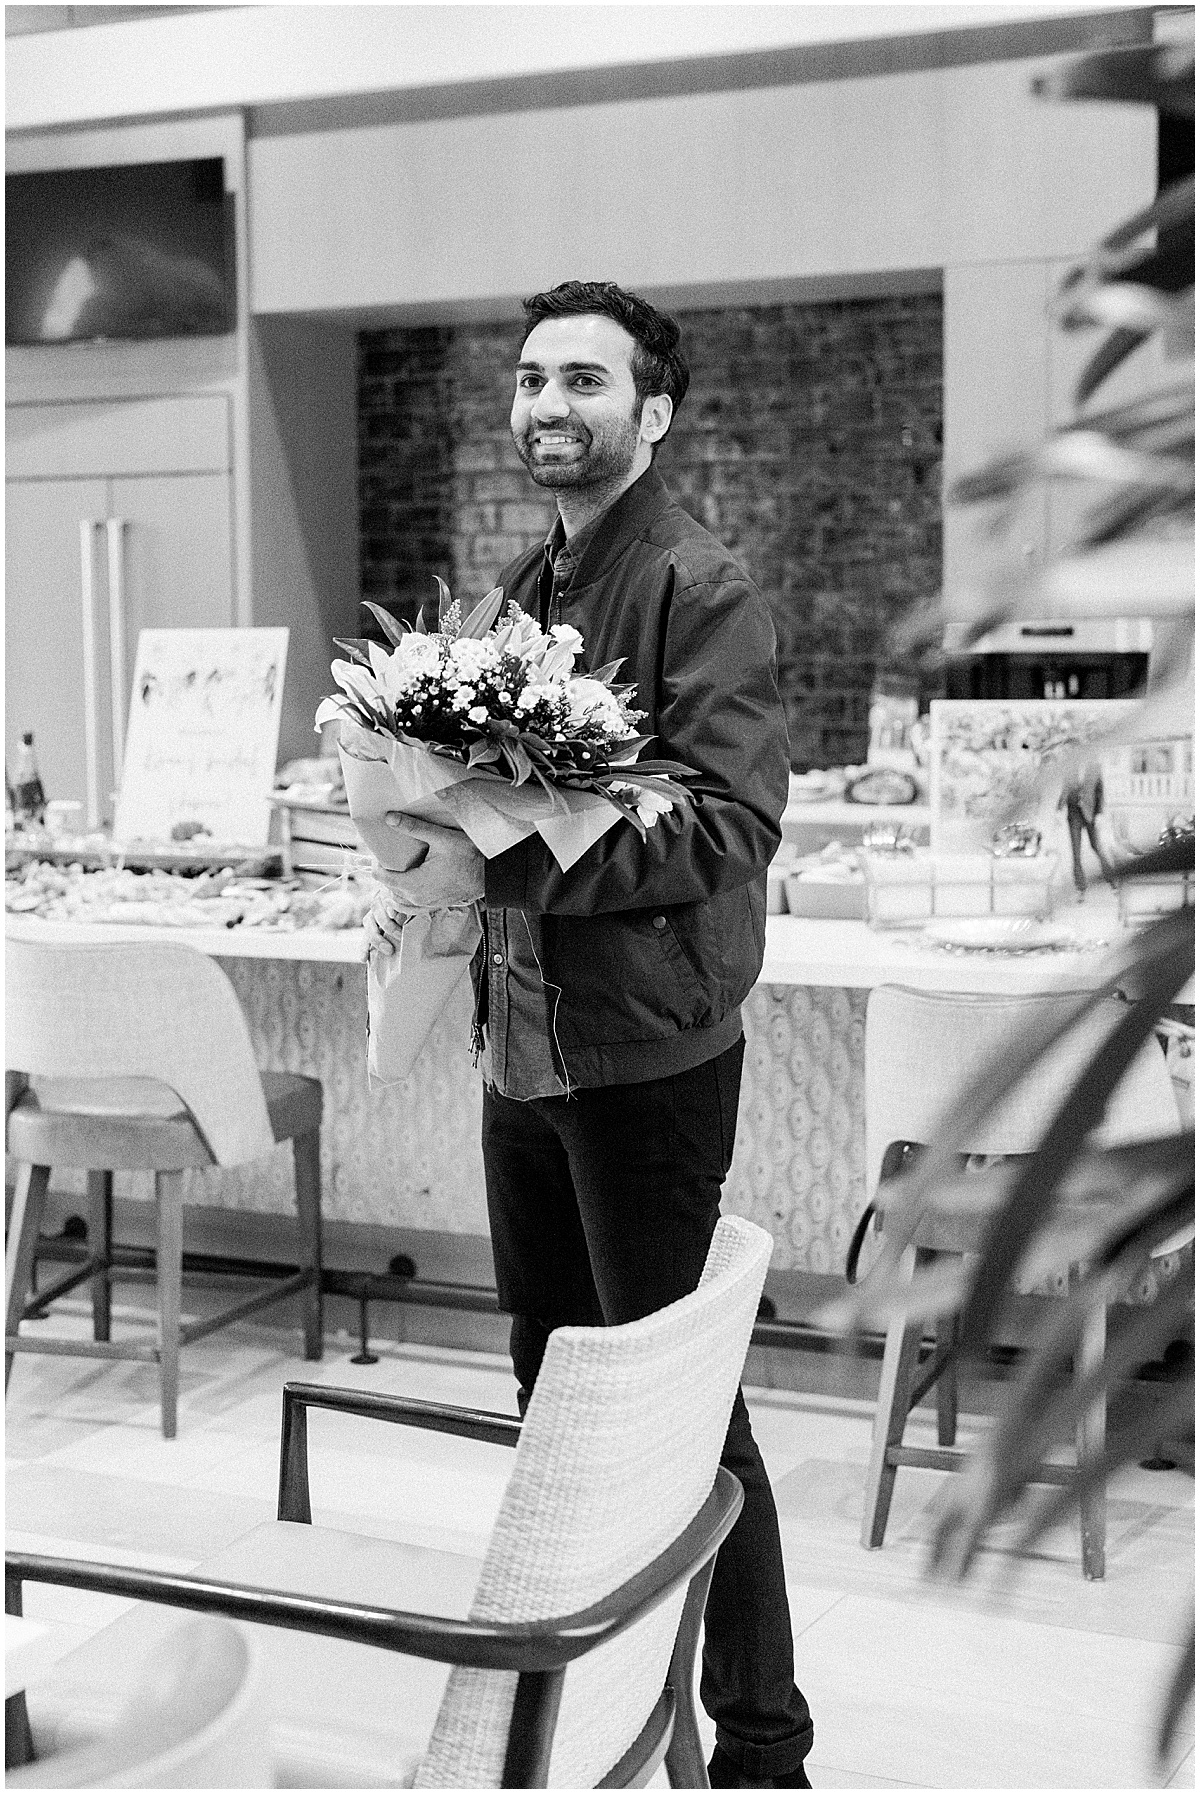 Indian Groom presents flowers to his bride at engagement party